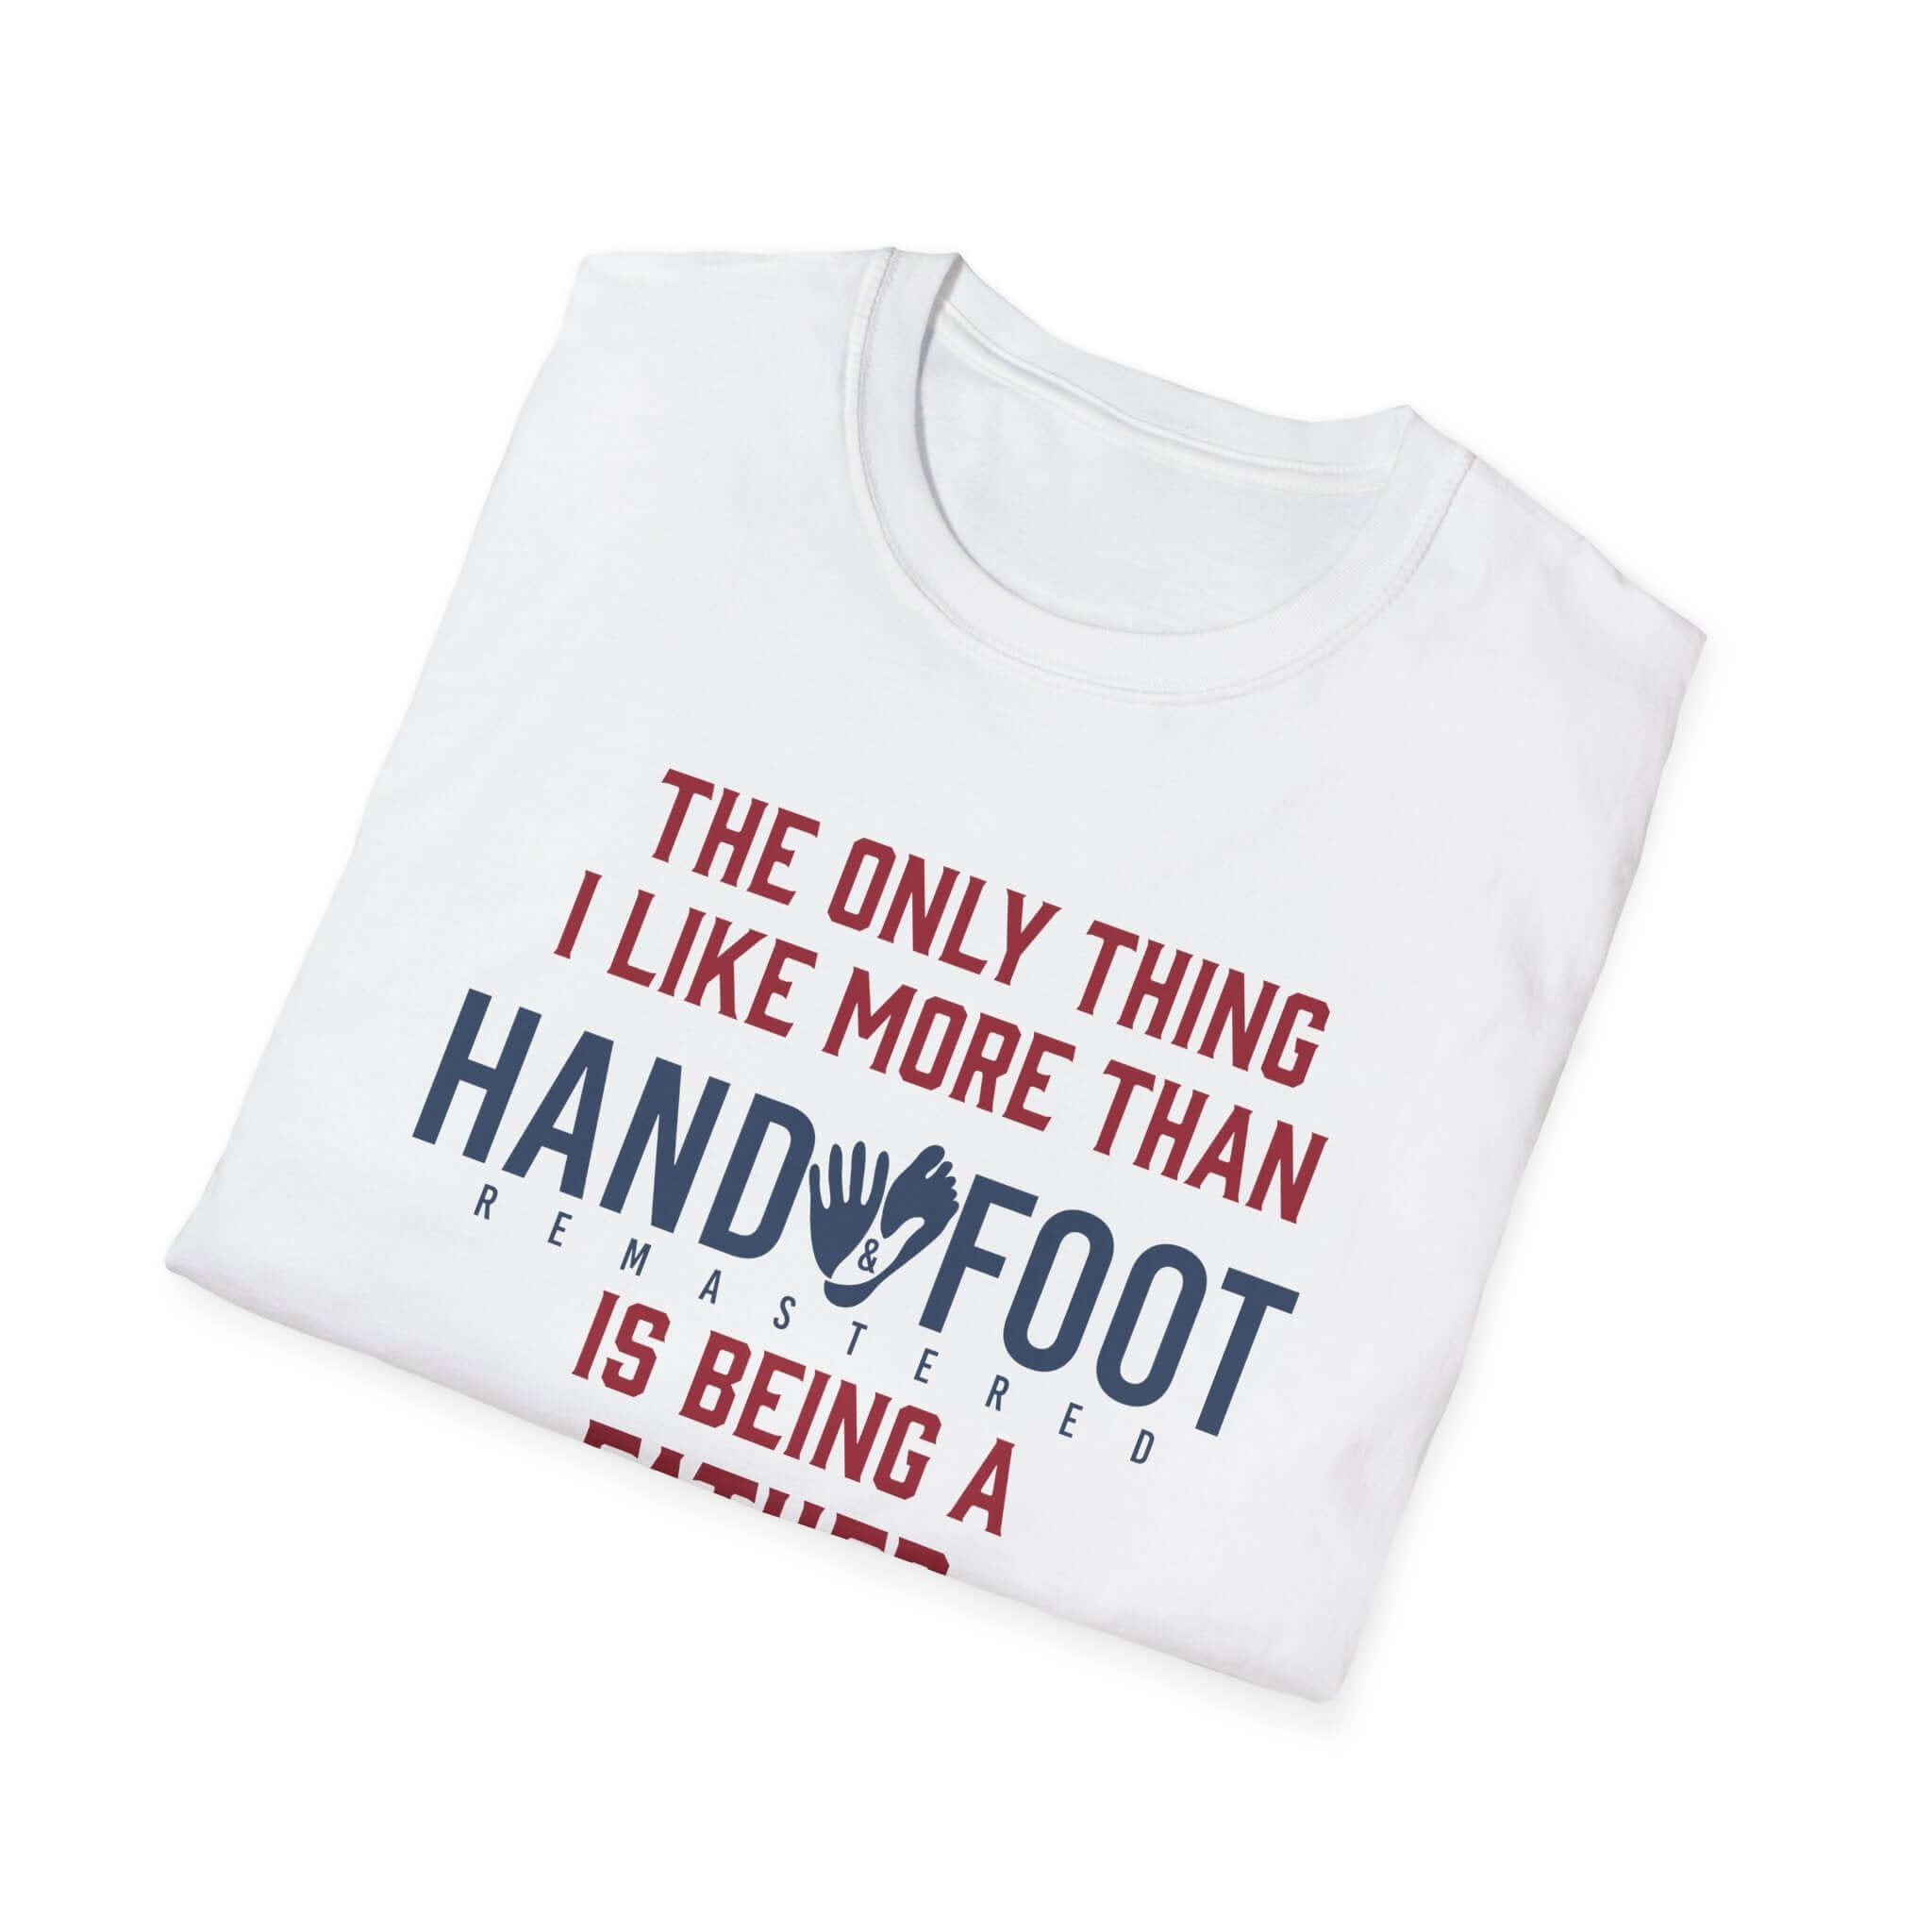 Being a Father Softstyle T-Shirt